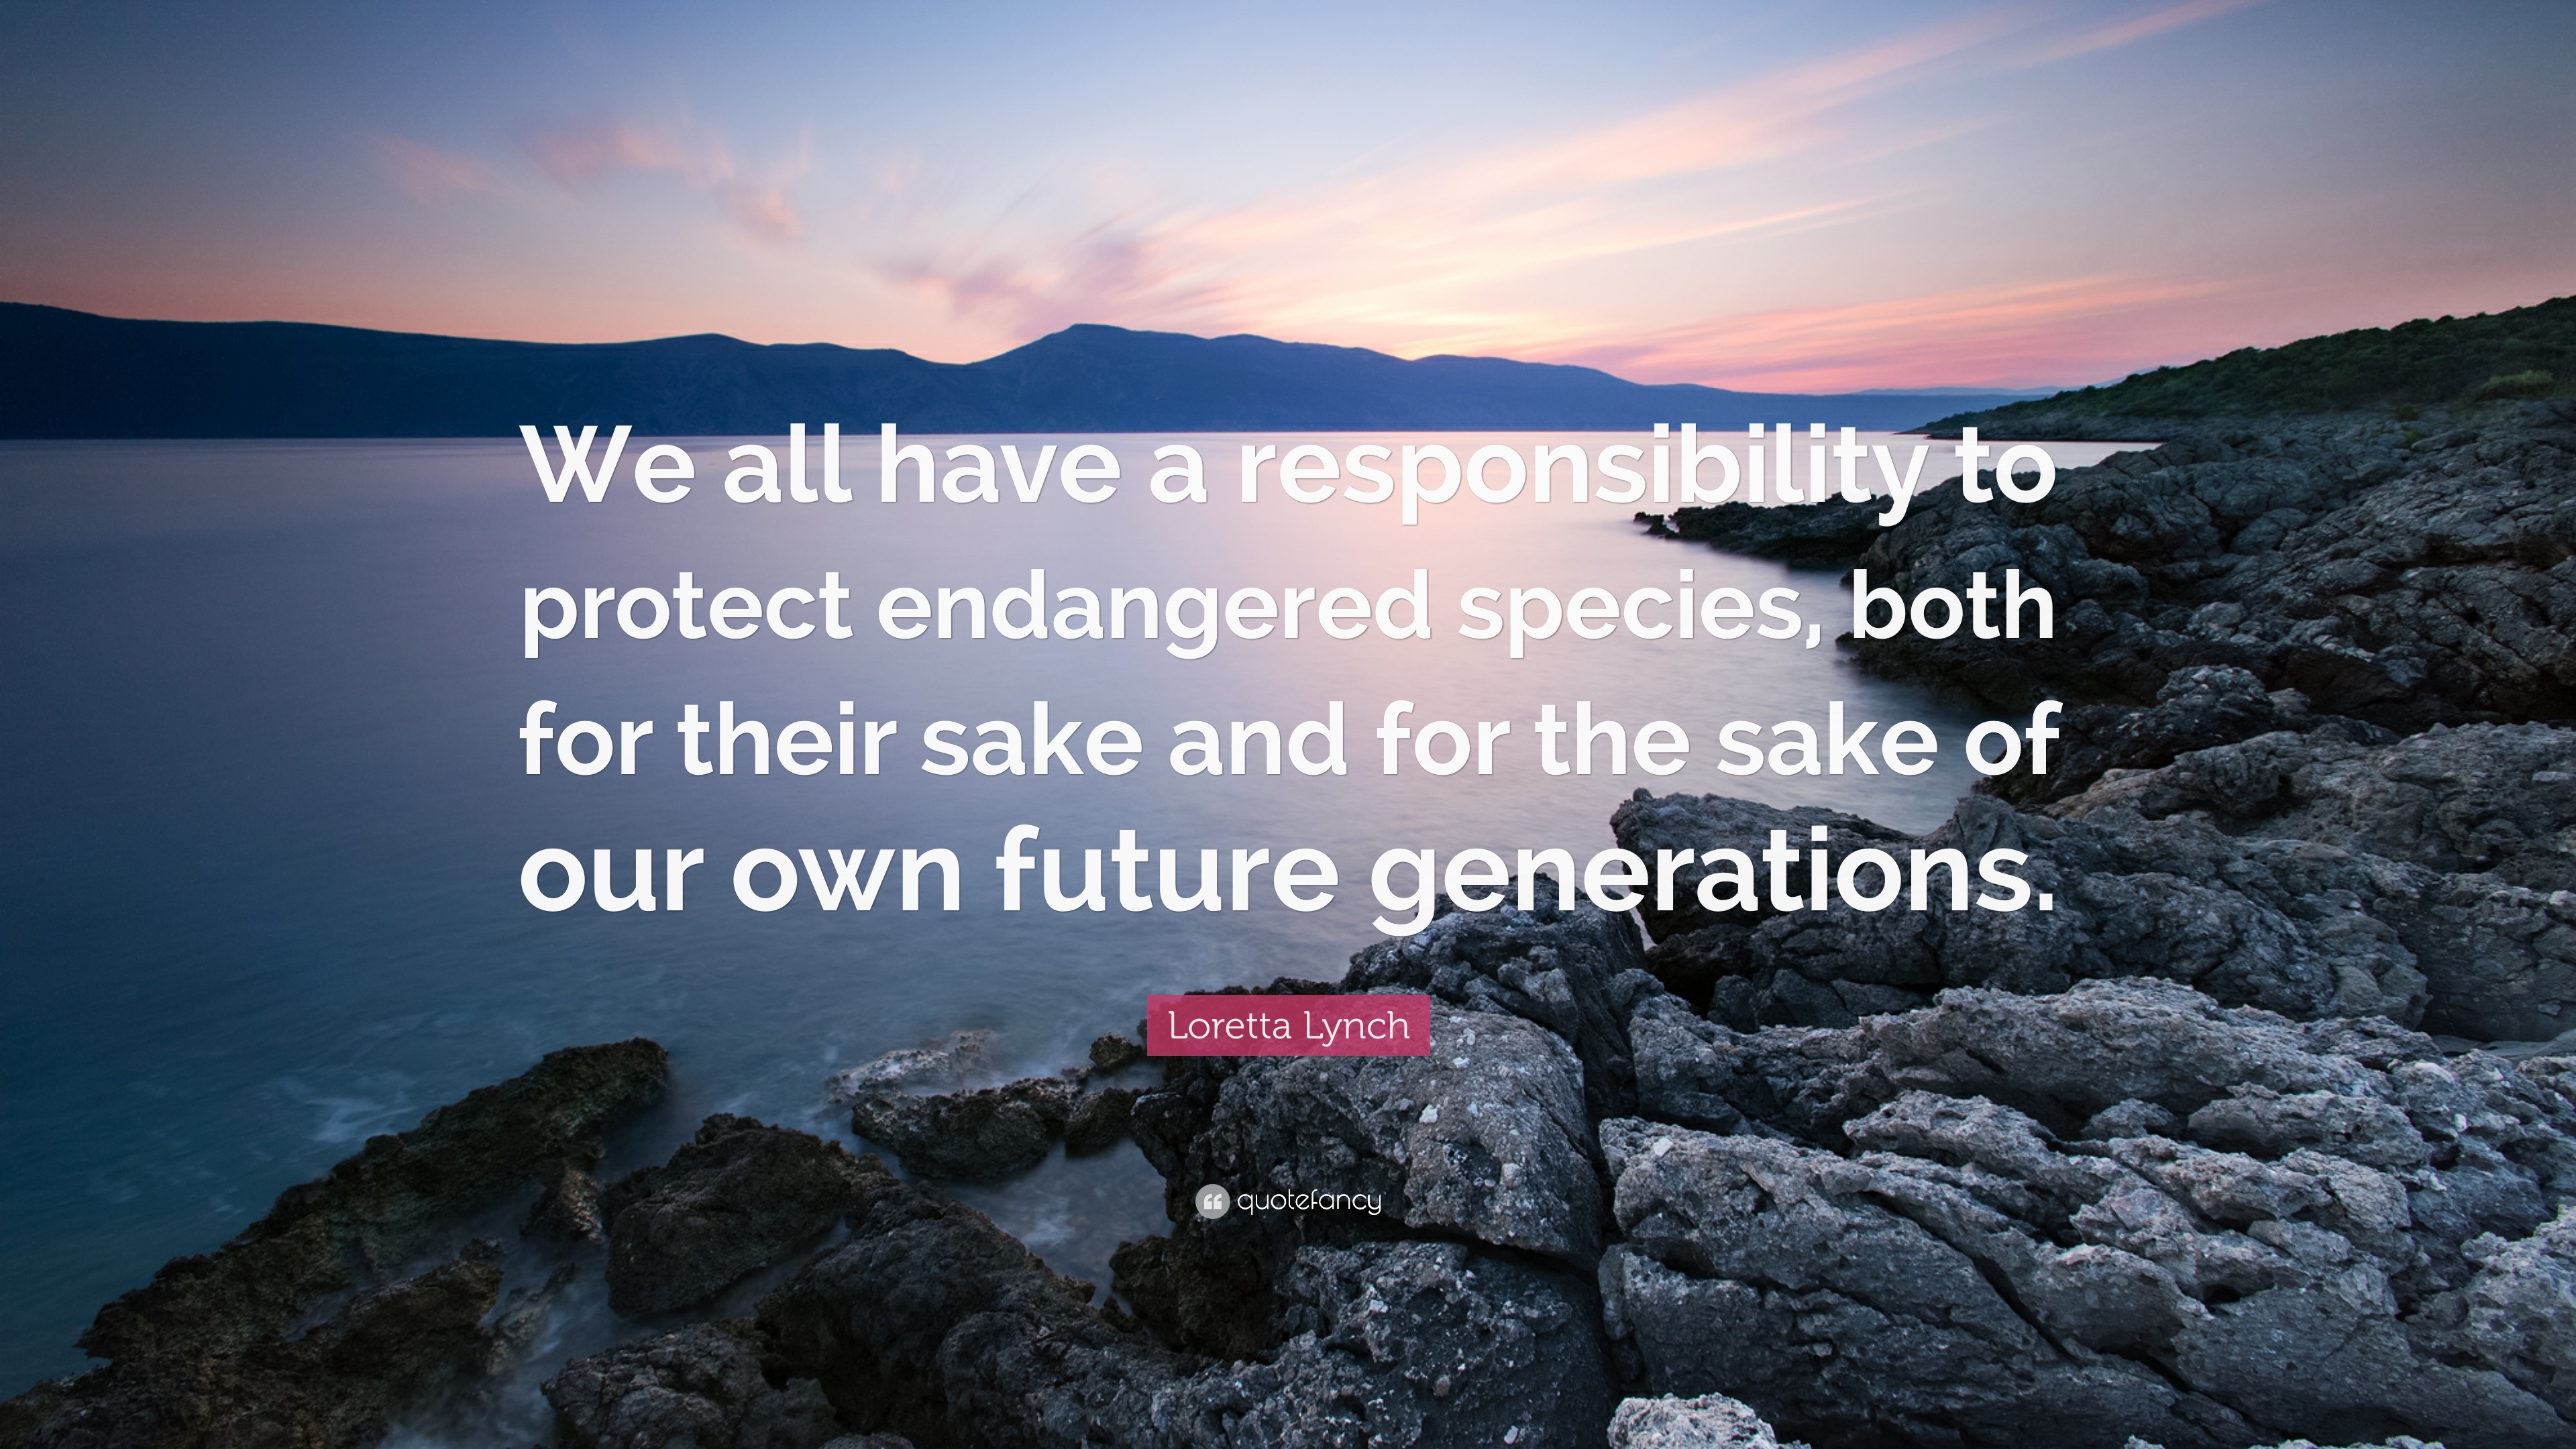 Loretta Lynch Quote: “We all have a responsibility to protect endangered  species, both for their sake and for the sake of our own future gener...”